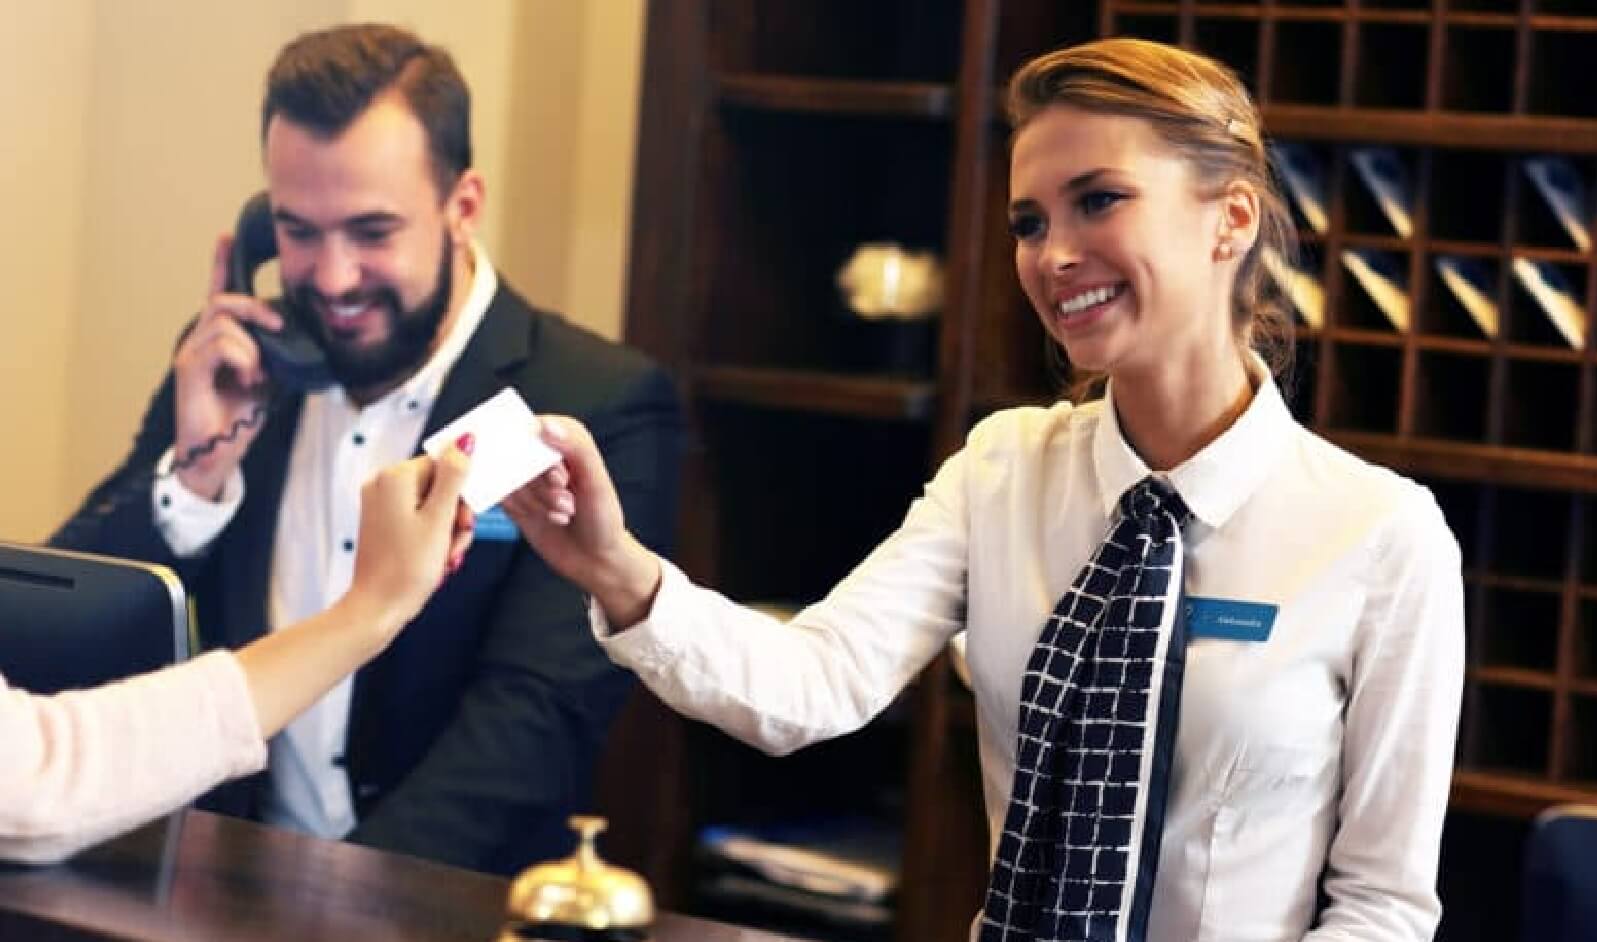 A female hotel receptionist at a Newport RI hotel hands a key card to a guest while a male colleague talks on a phone in the background.